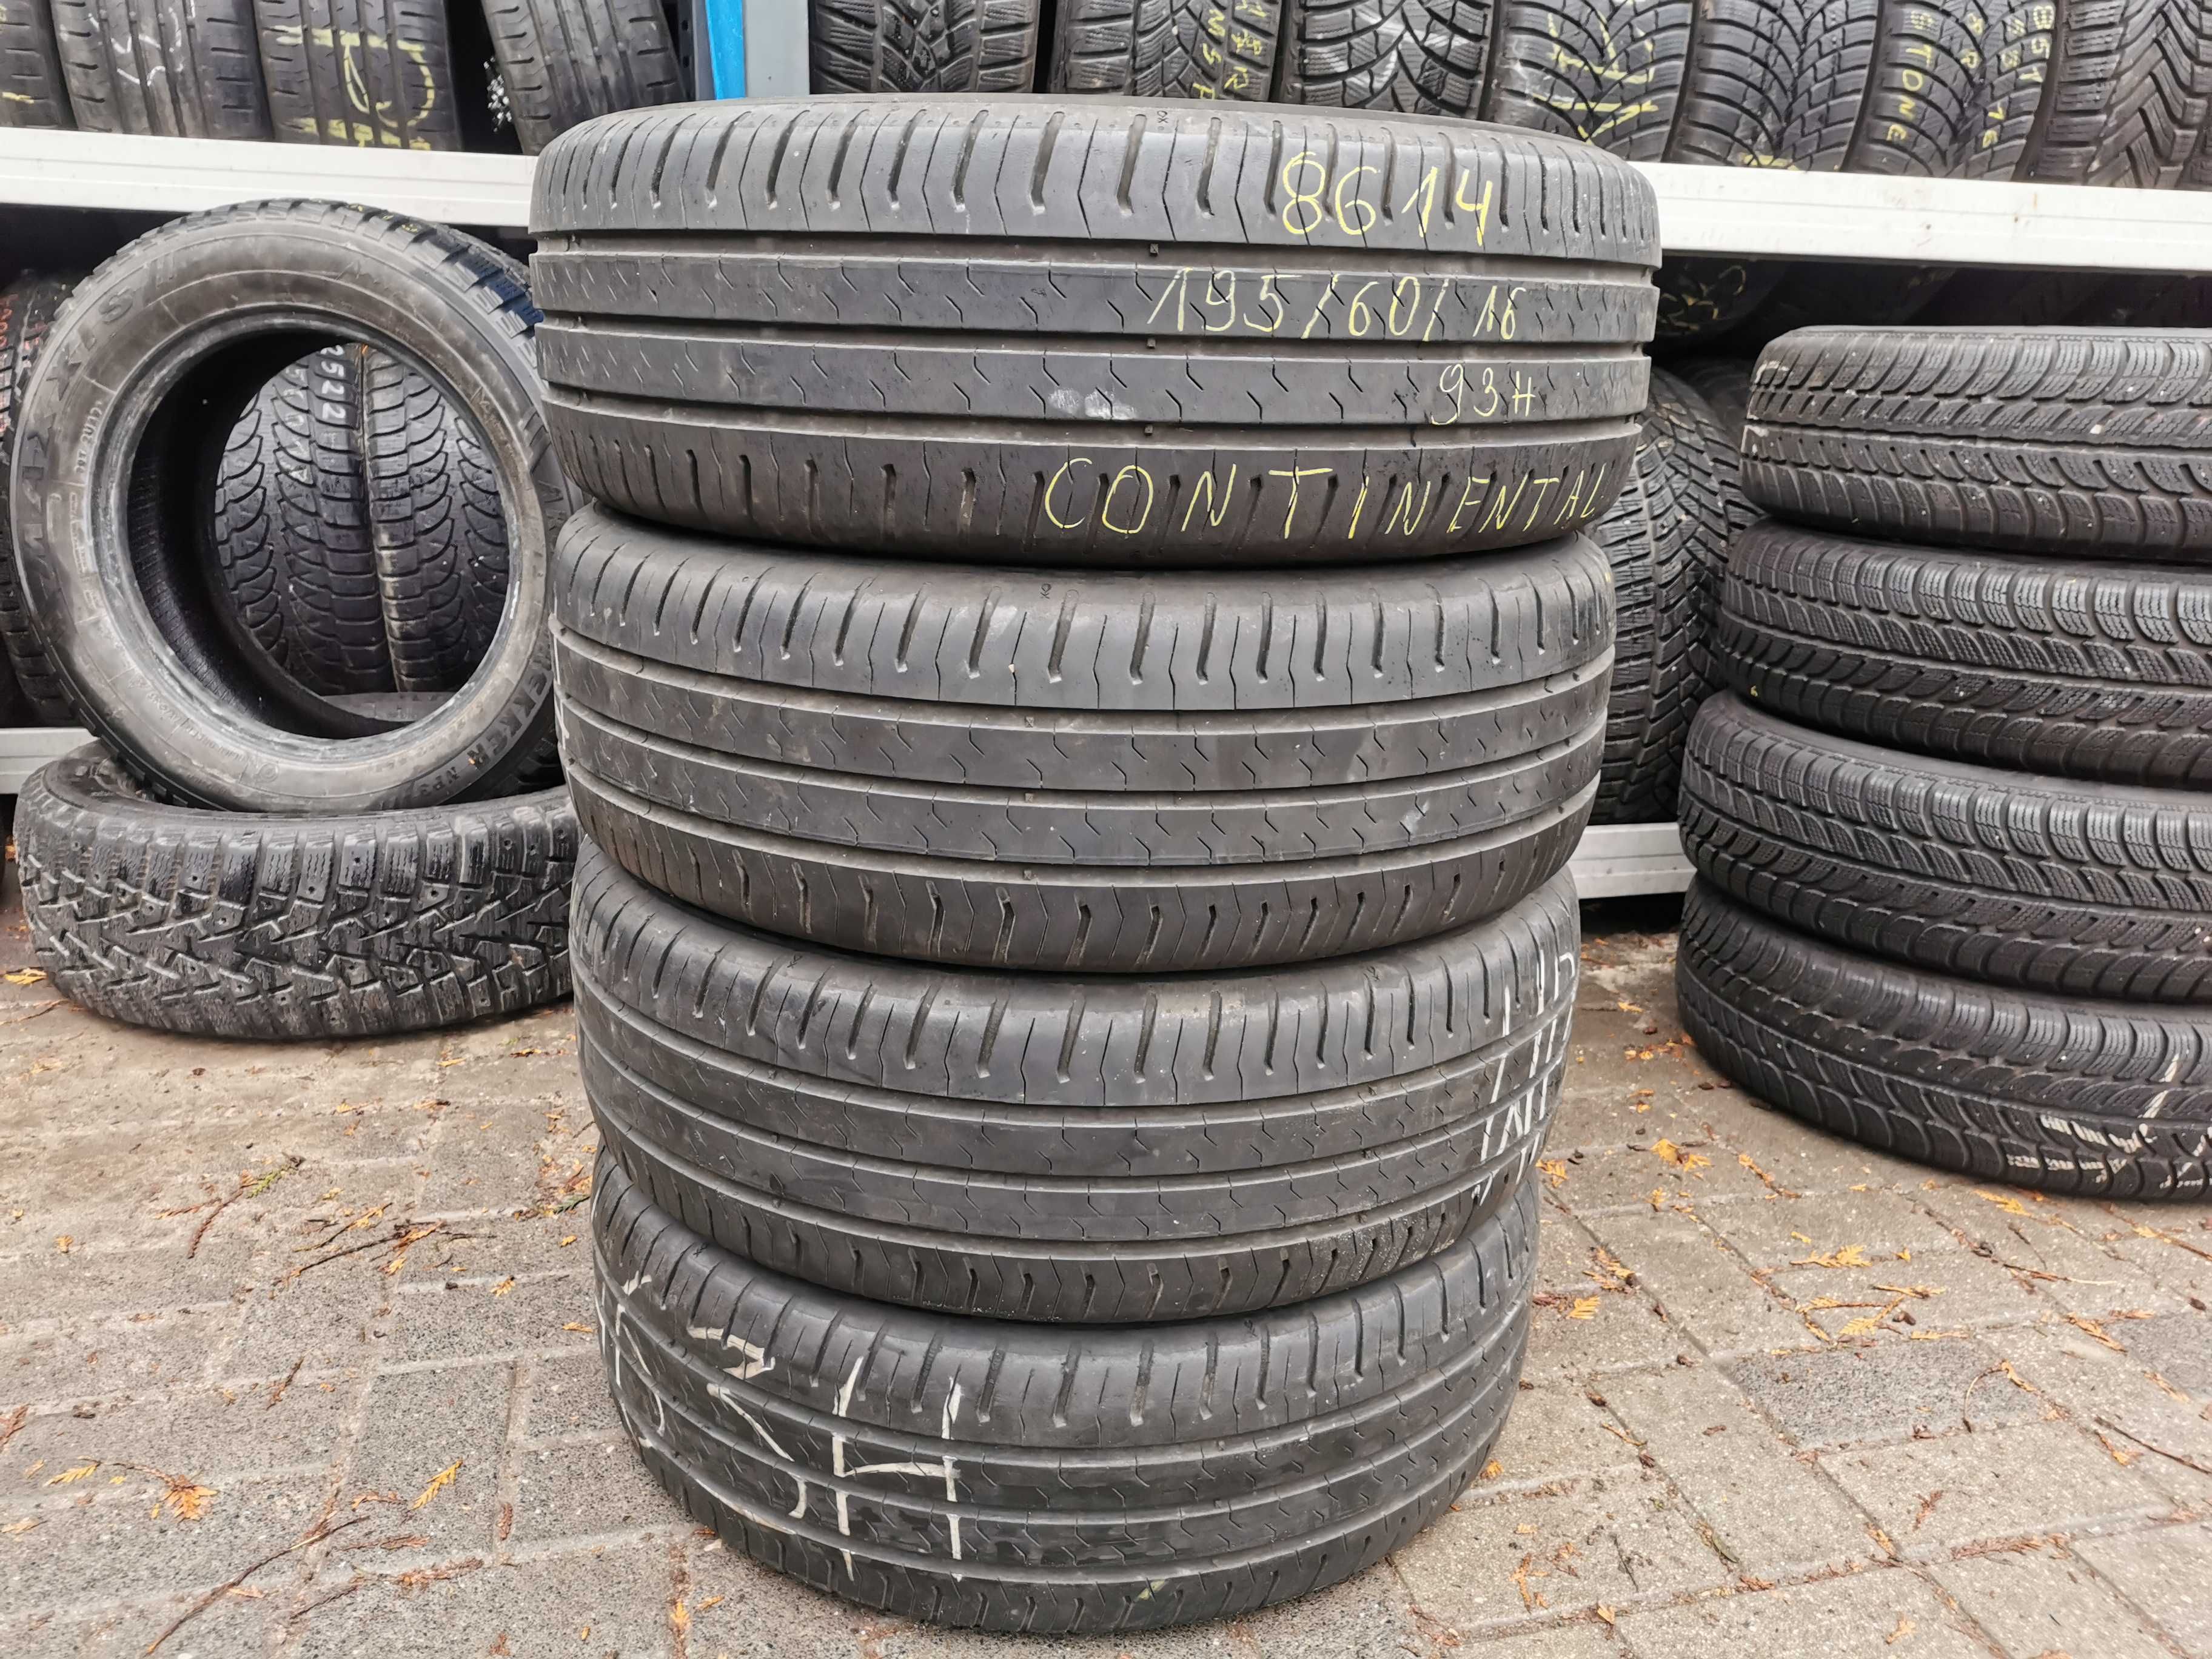 4x Continental EcoContact 5 195/60r16 93H N8614